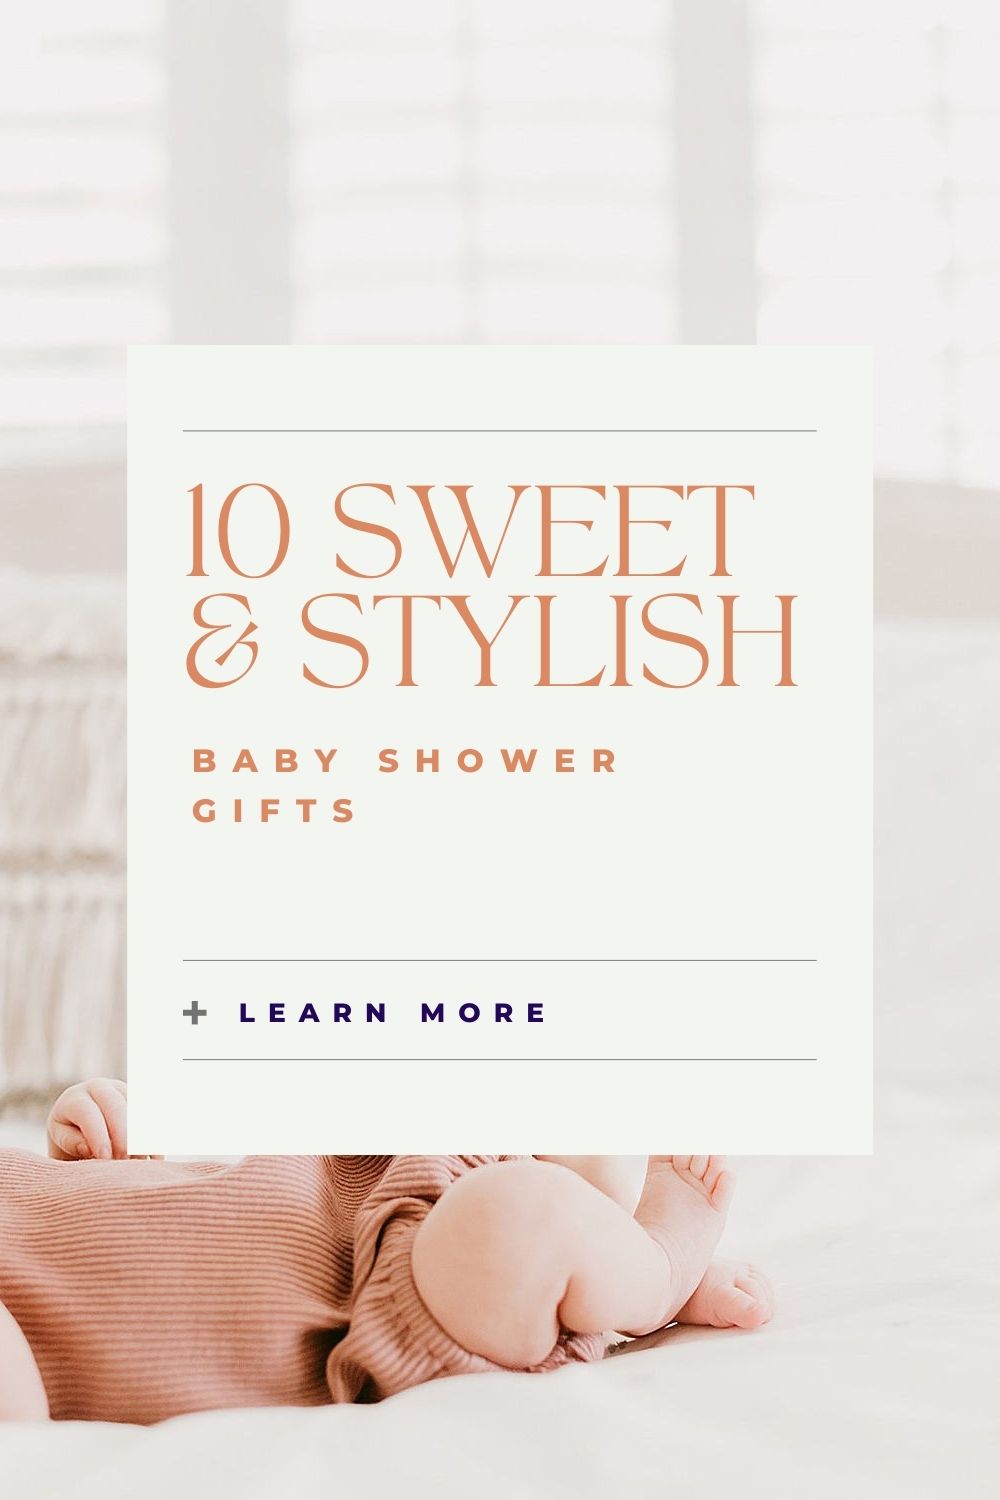 10 Sweet & Stylish Baby Shower Gifts